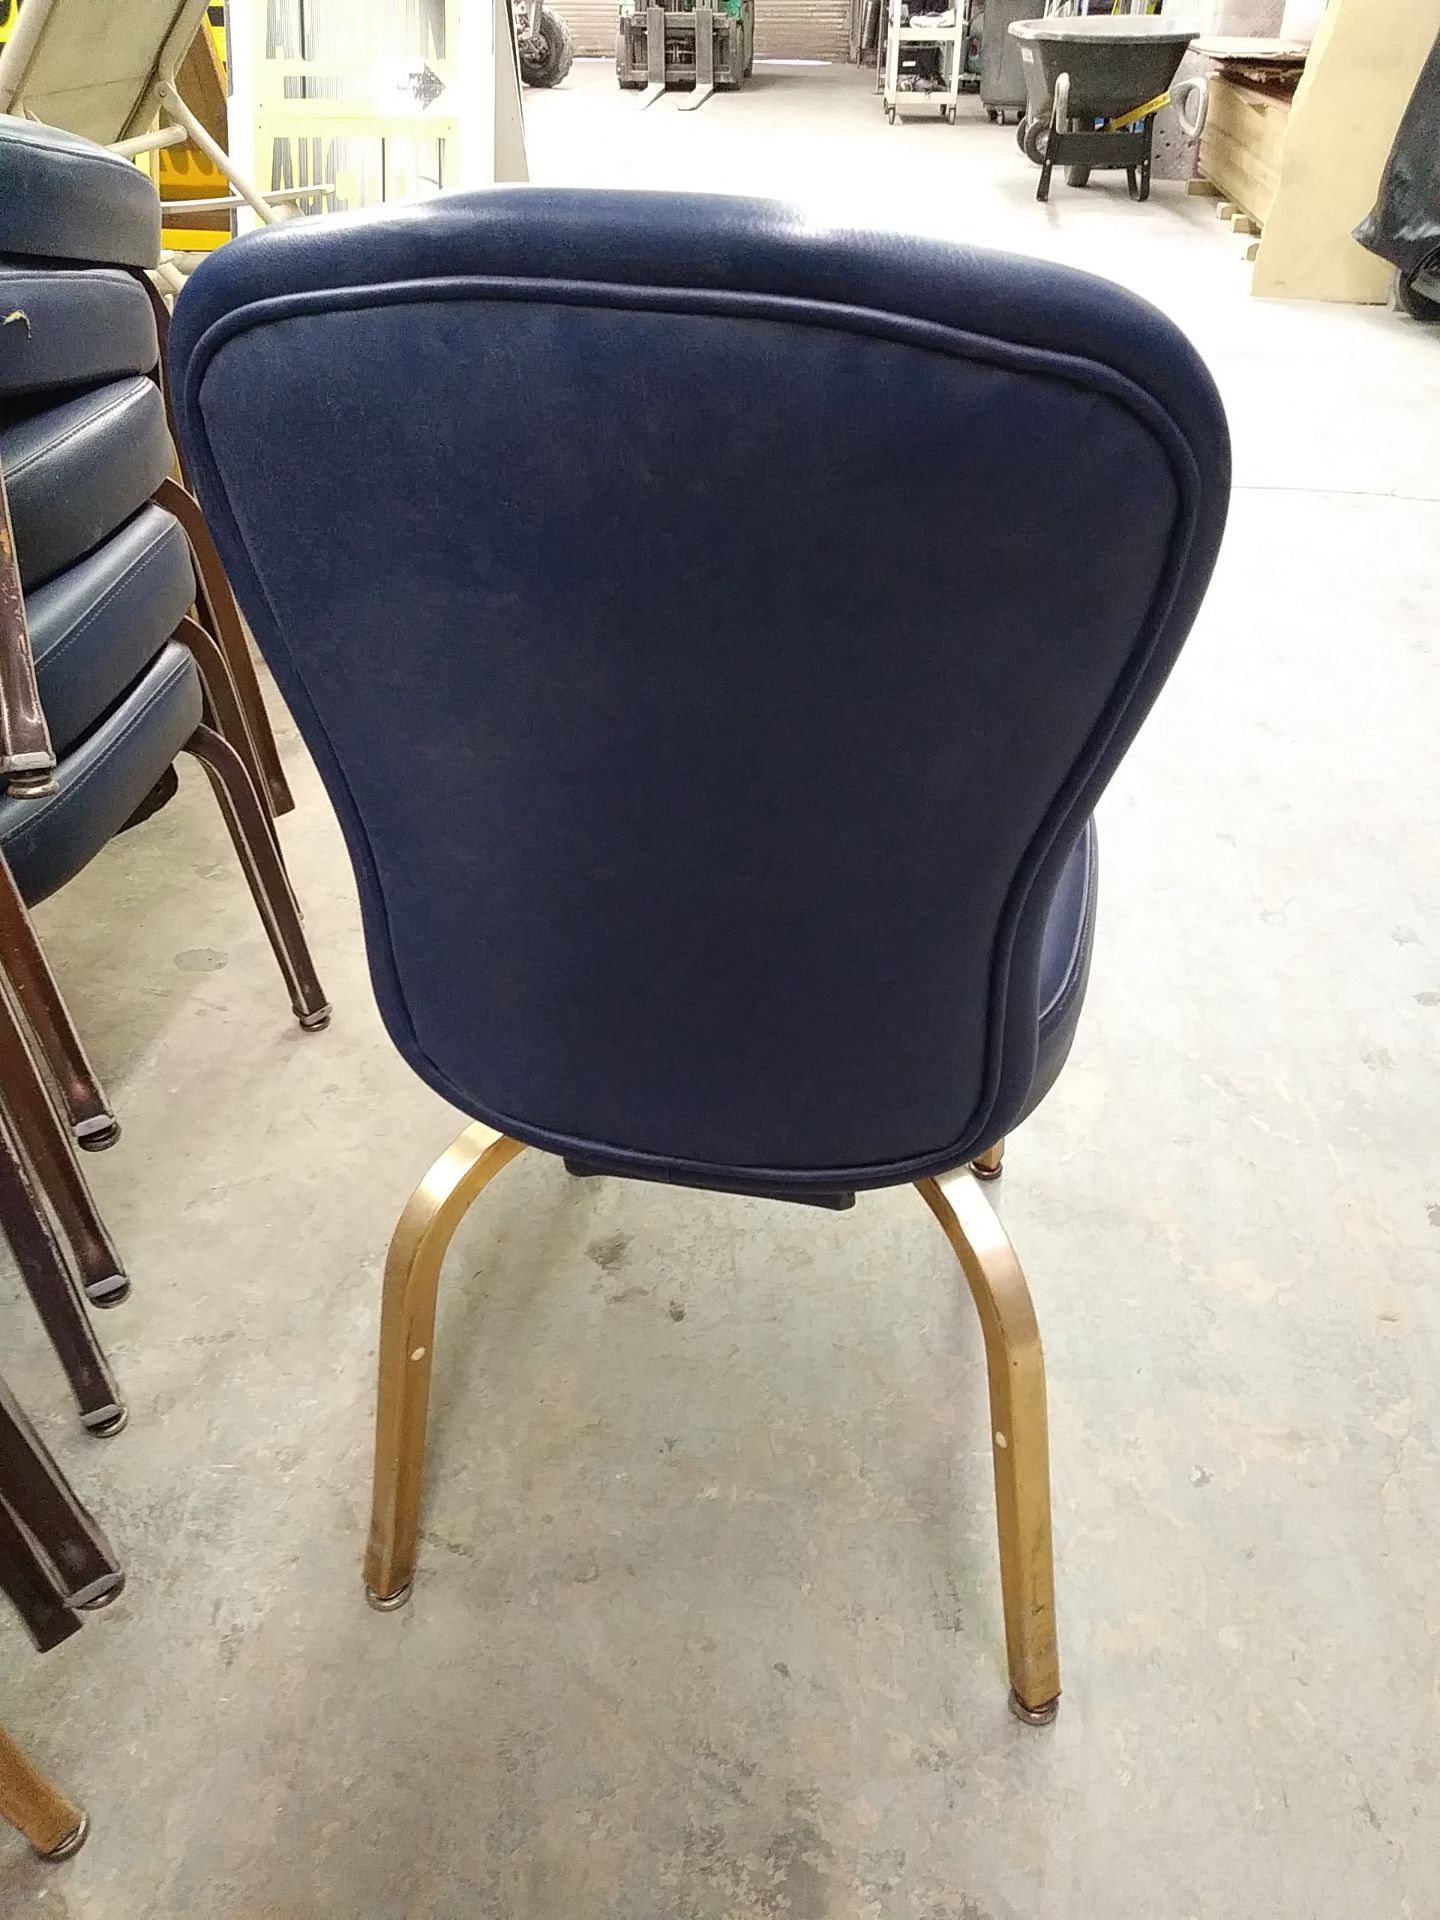 BLUE LEATHER / METAL FRAME RESTAURANT DINING CHAIRS (QTY X MONEY) - Image 4 of 5